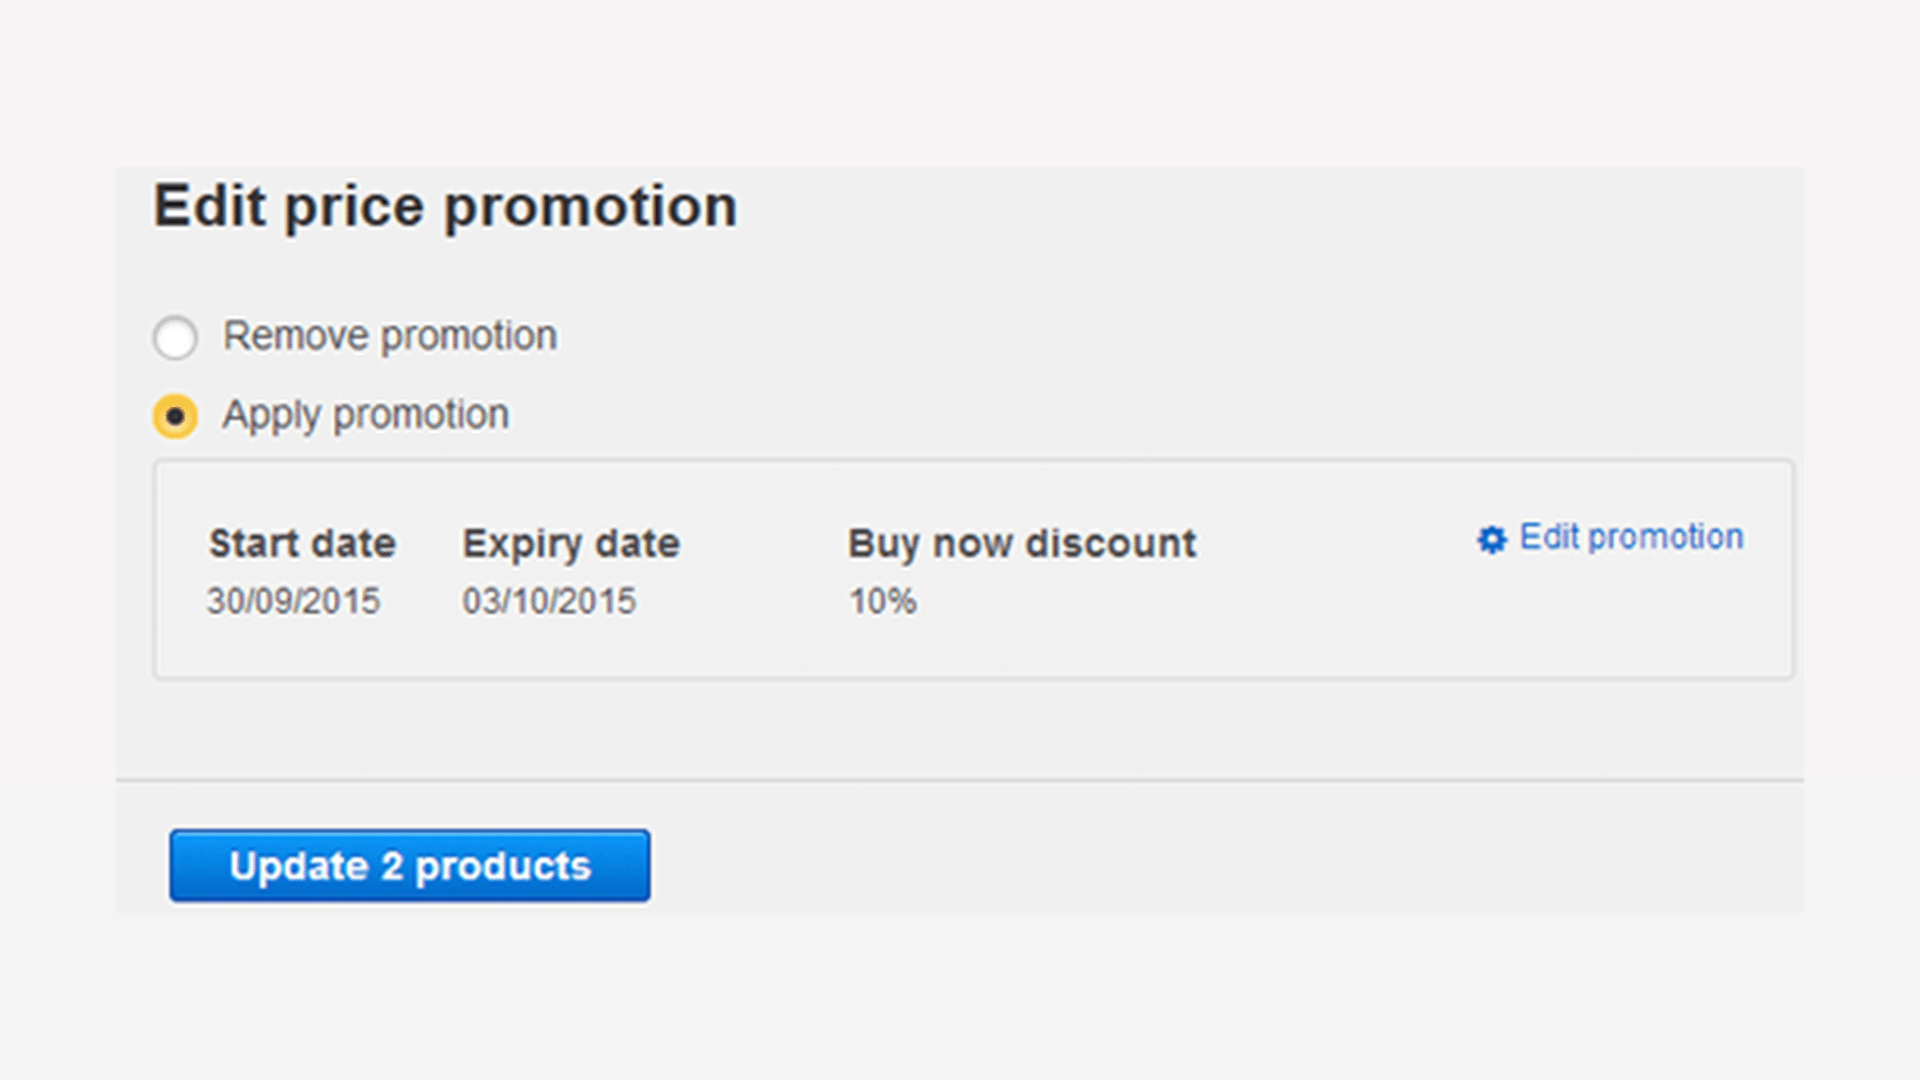 Confirmation of editing price promotion